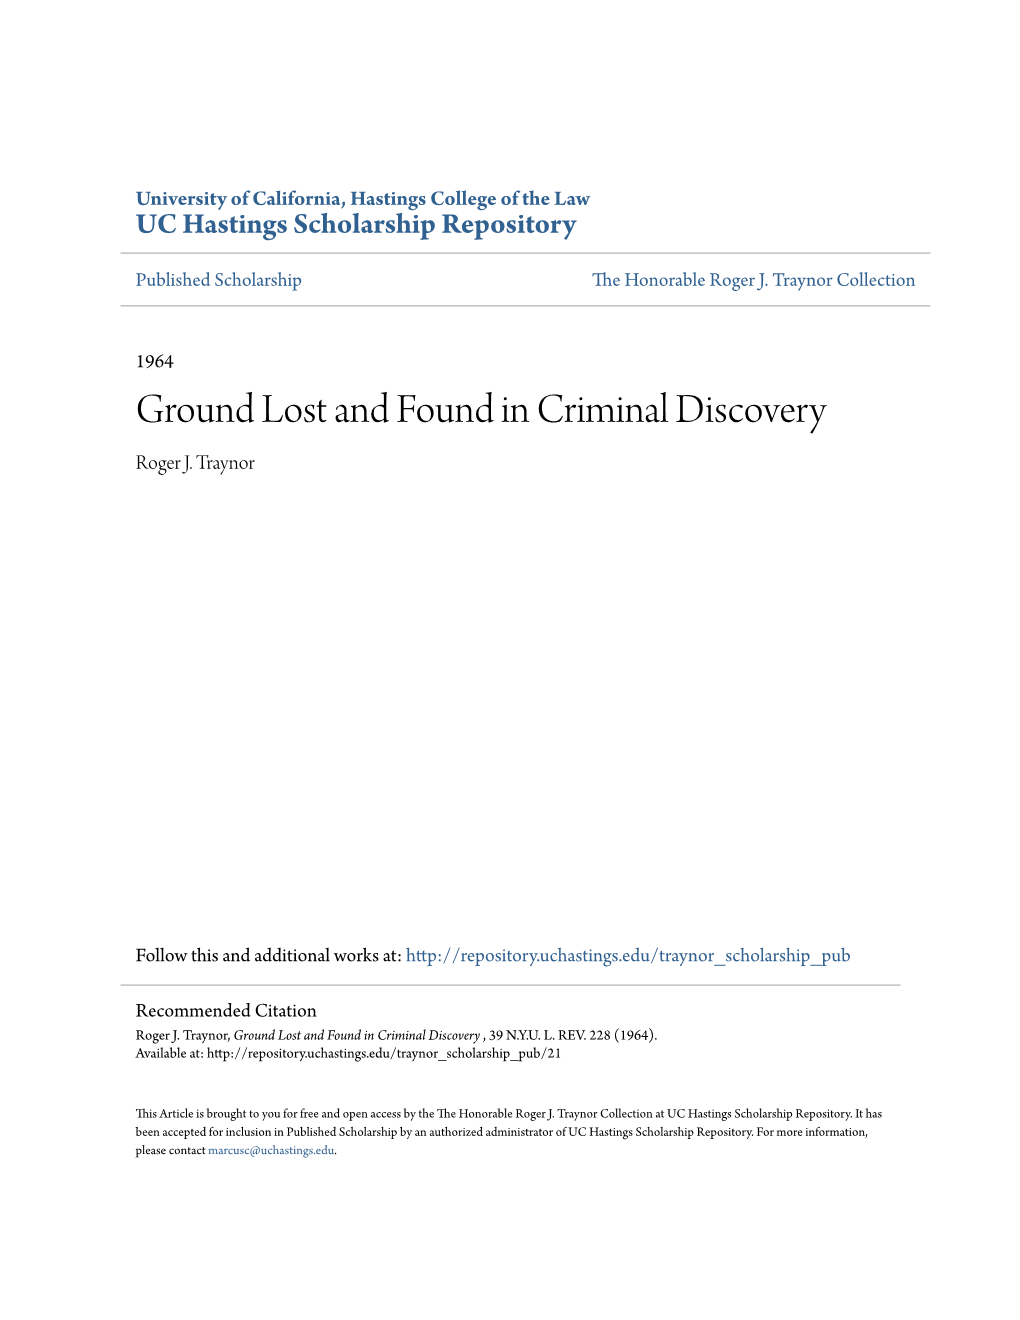 Ground Lost and Found in Criminal Discovery Roger J